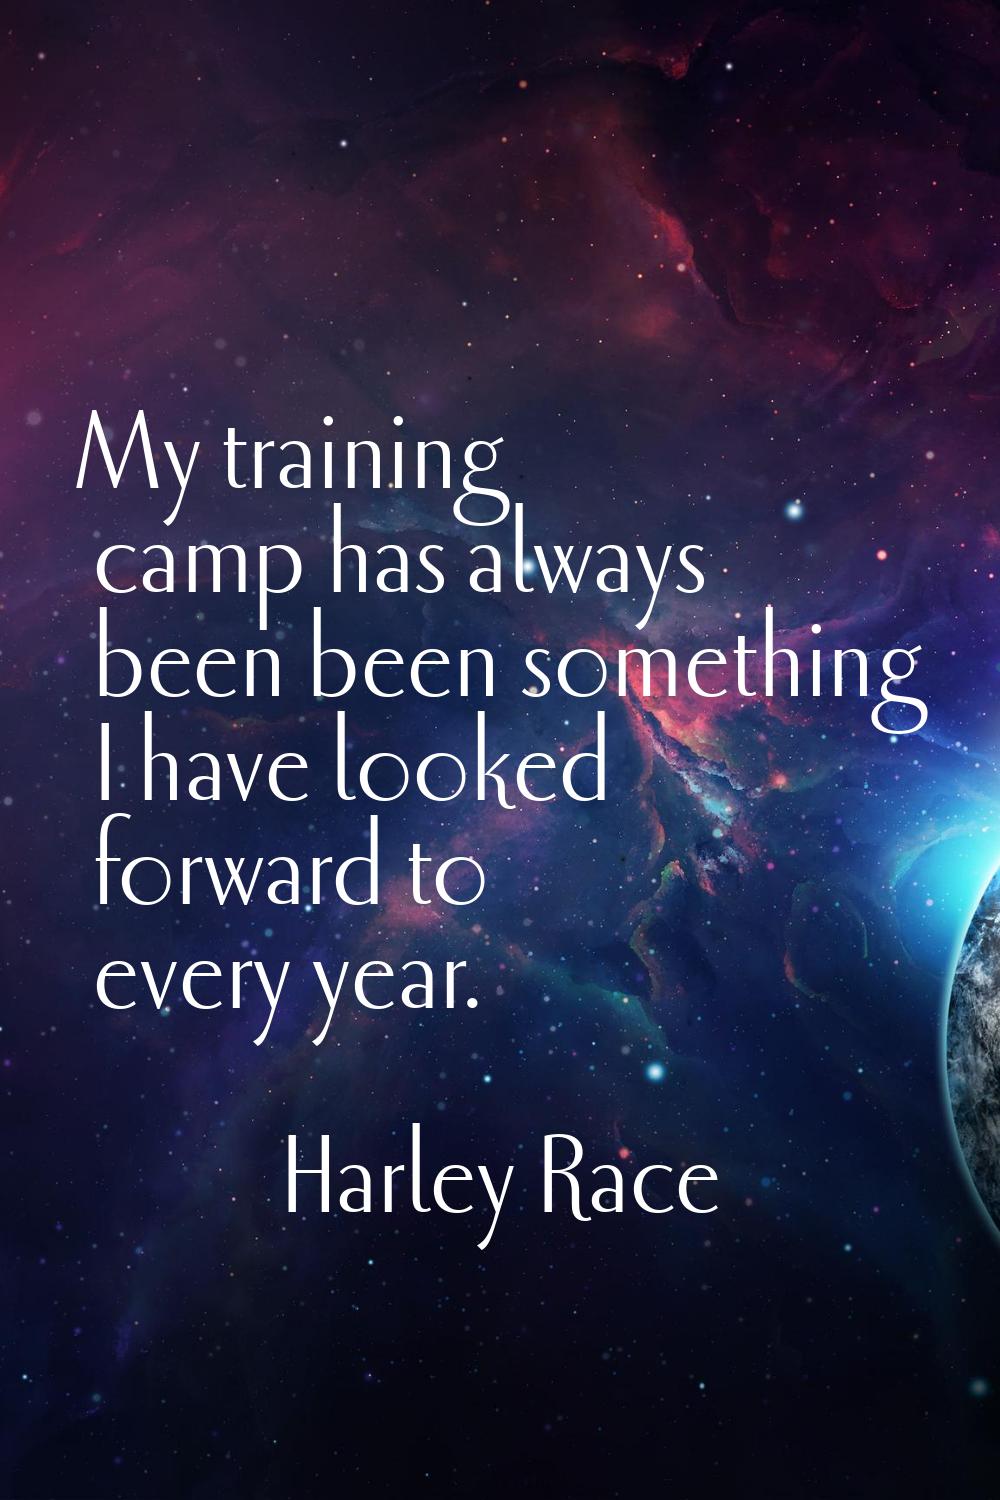 My training camp has always been been something I have looked forward to every year.